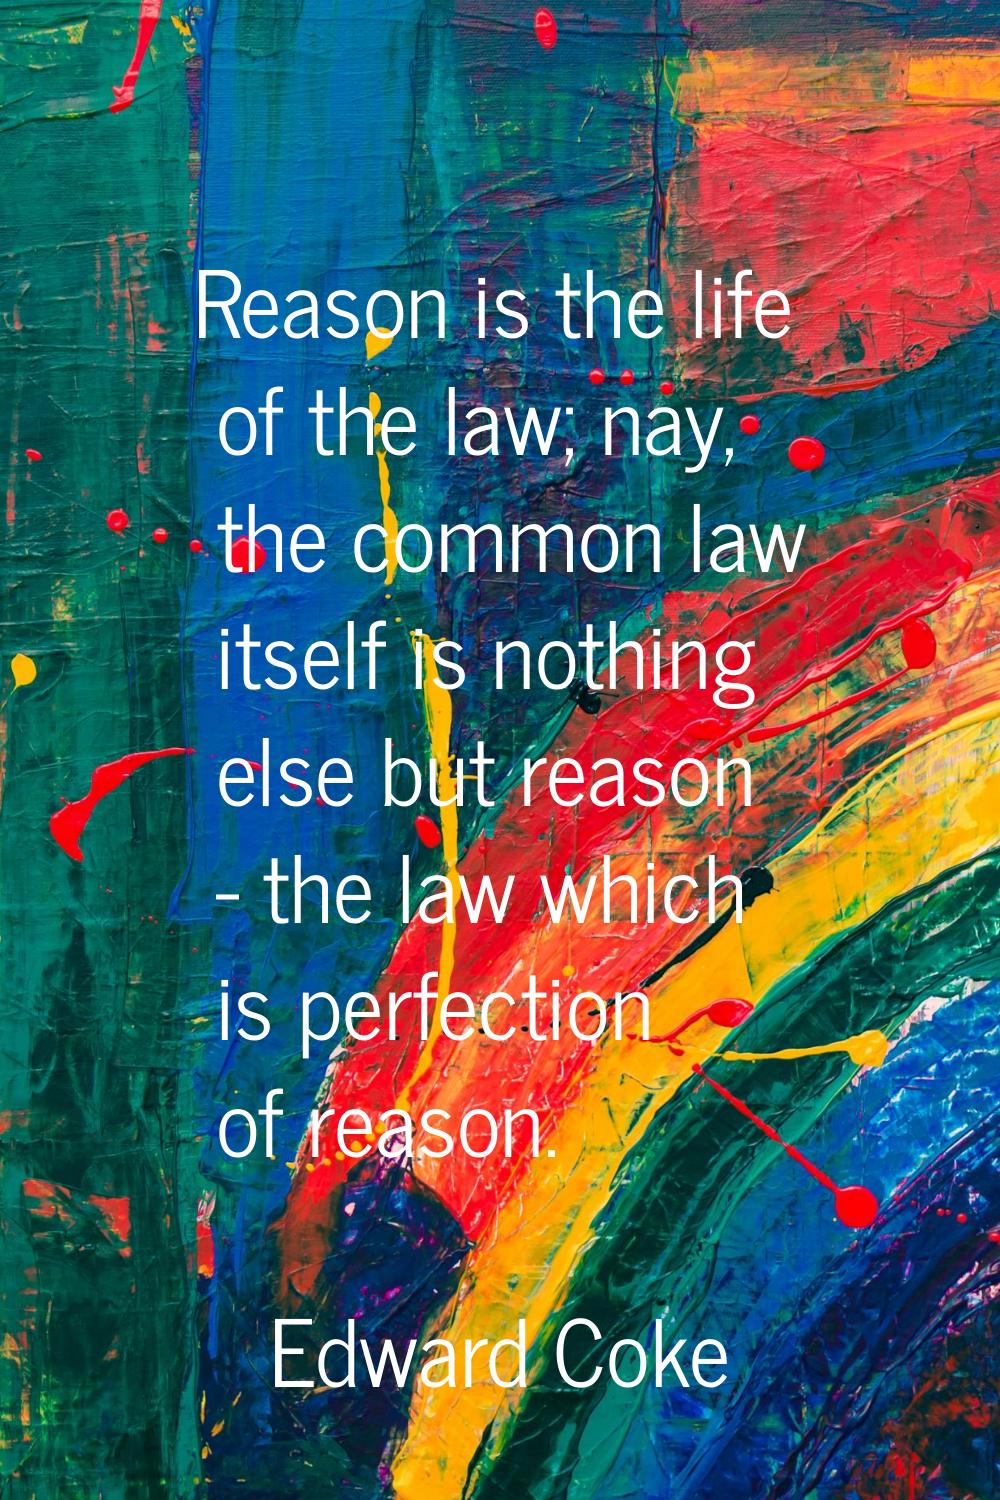 Reason is the life of the law; nay, the common law itself is nothing else but reason - the law whic